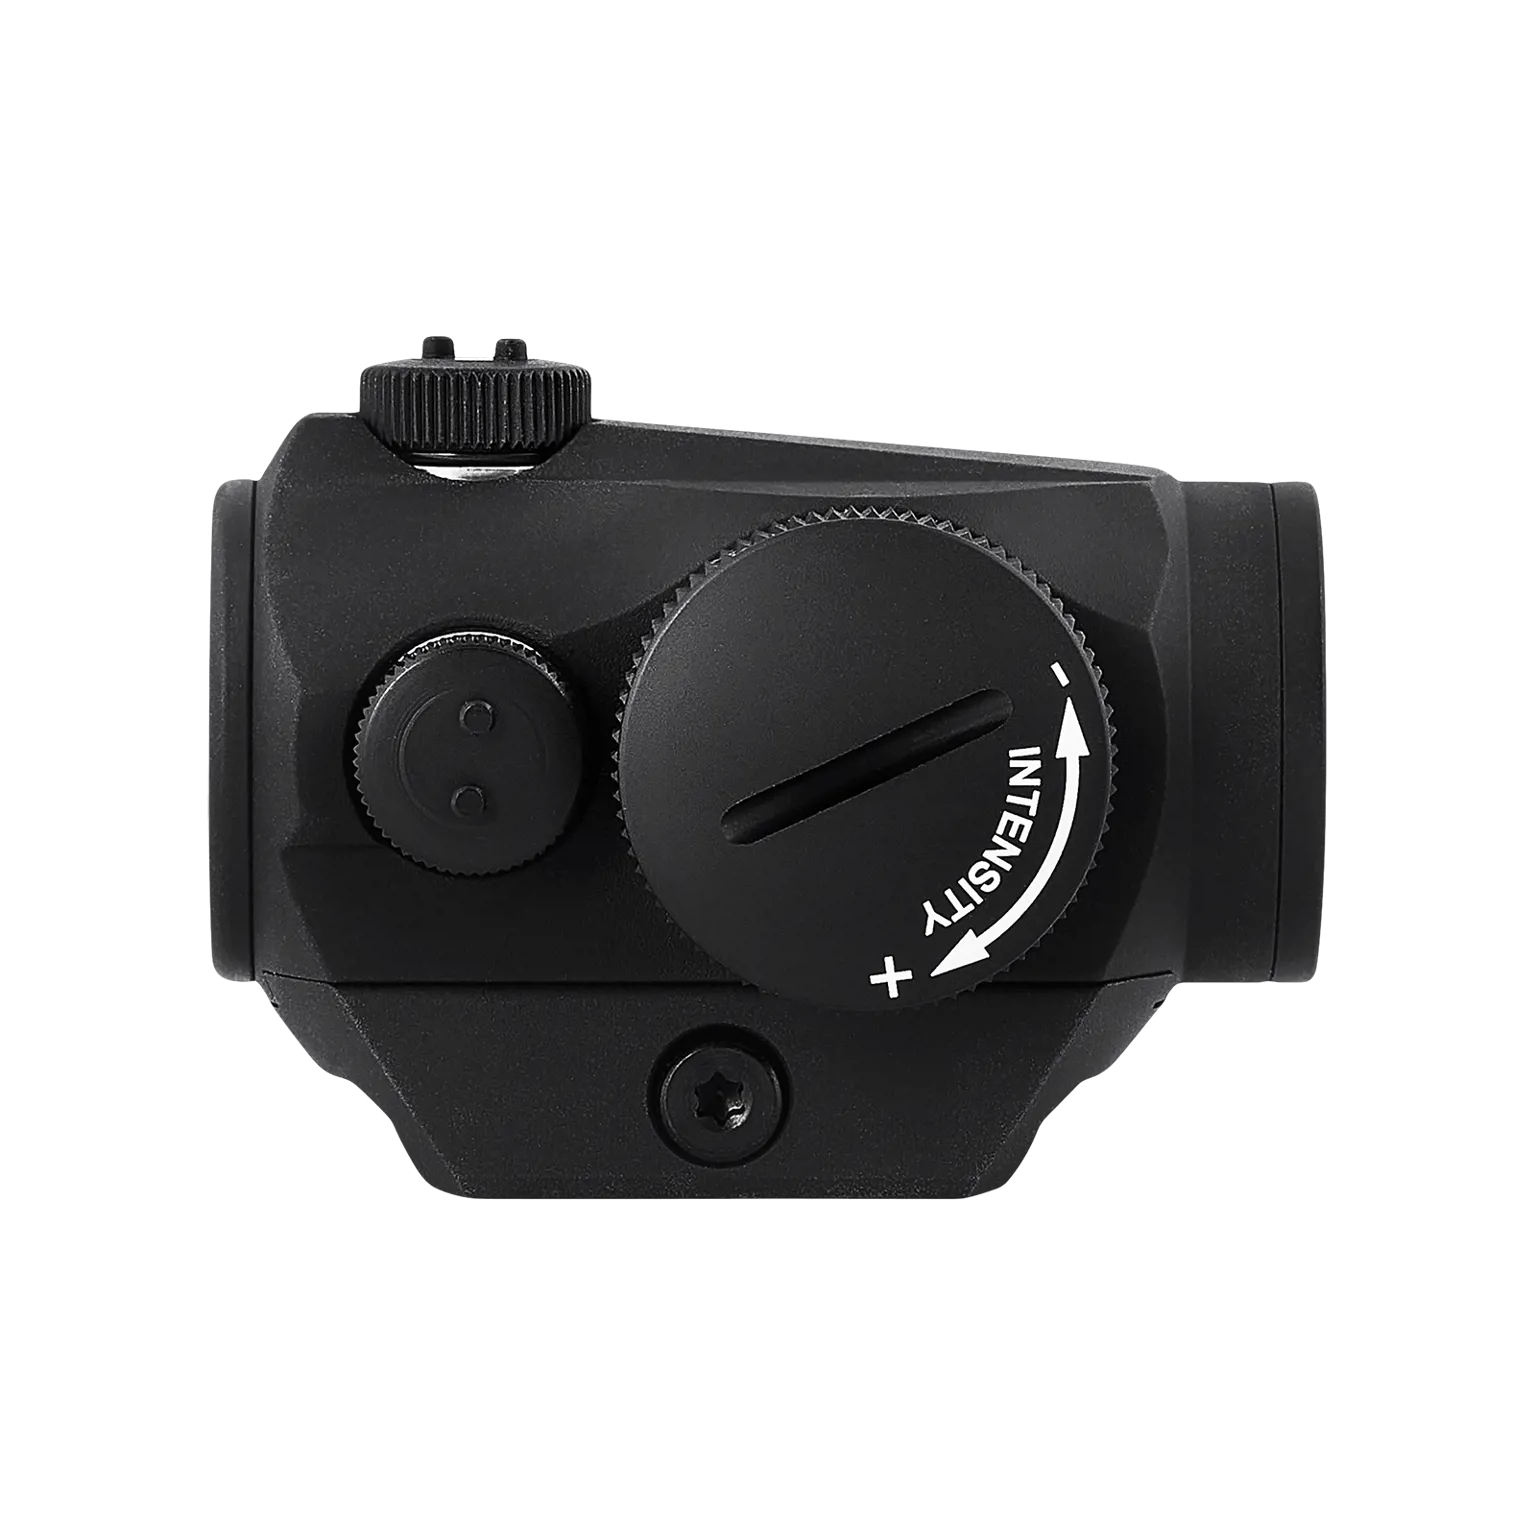 Micro H-1™ 4 MOA - Red dot reflex sight with standard mount for Weaver/Picatinny - 4